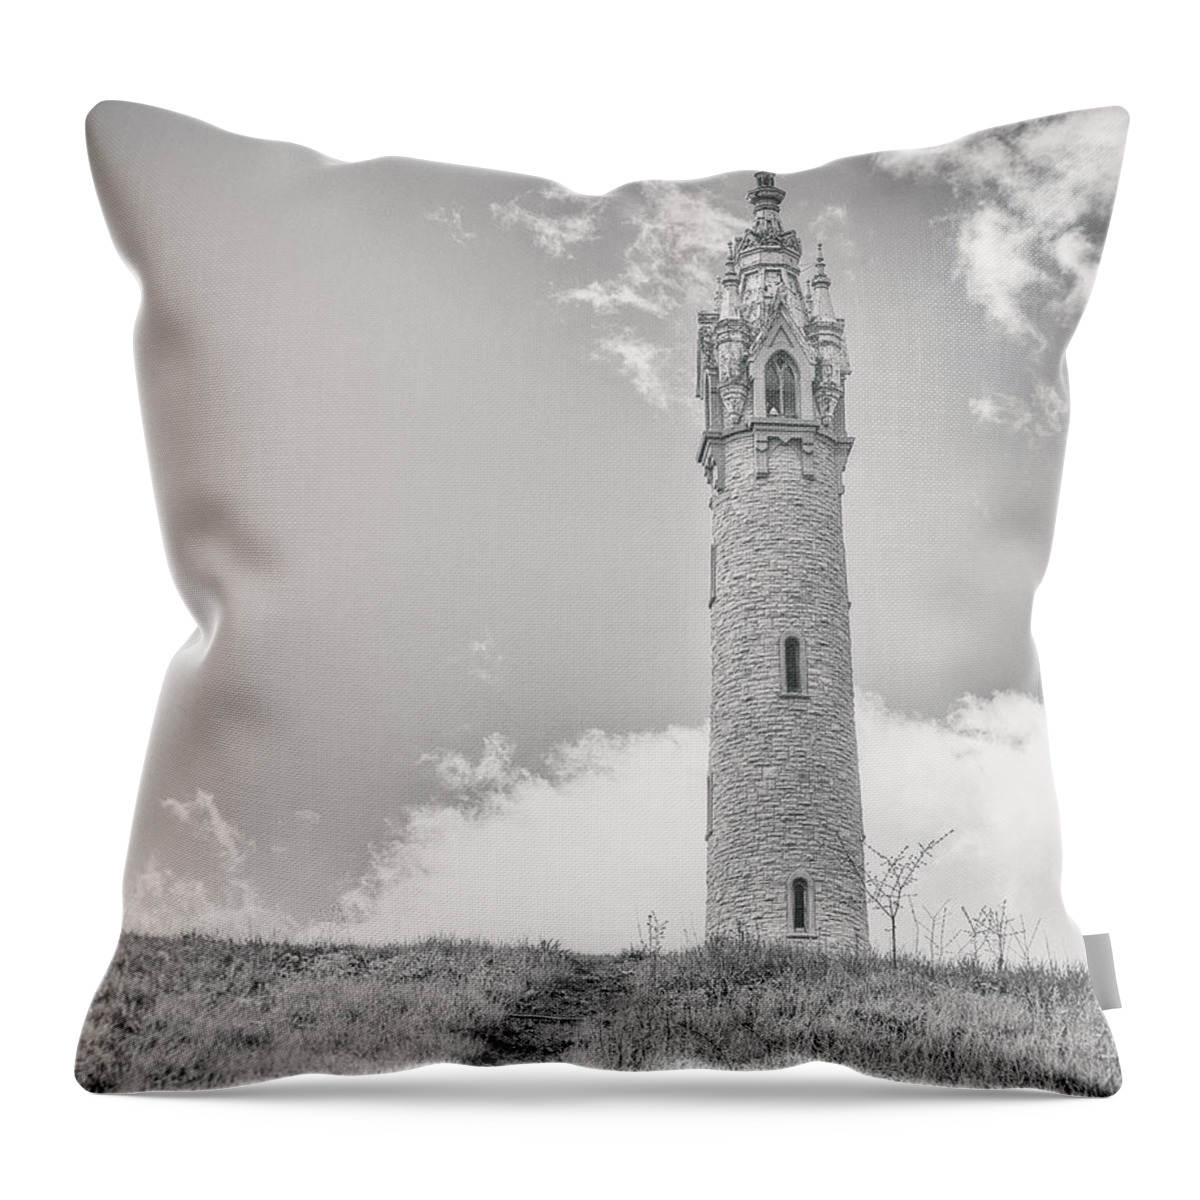 Castle Throw Pillow featuring the photograph The Castle Tower by Scott Norris